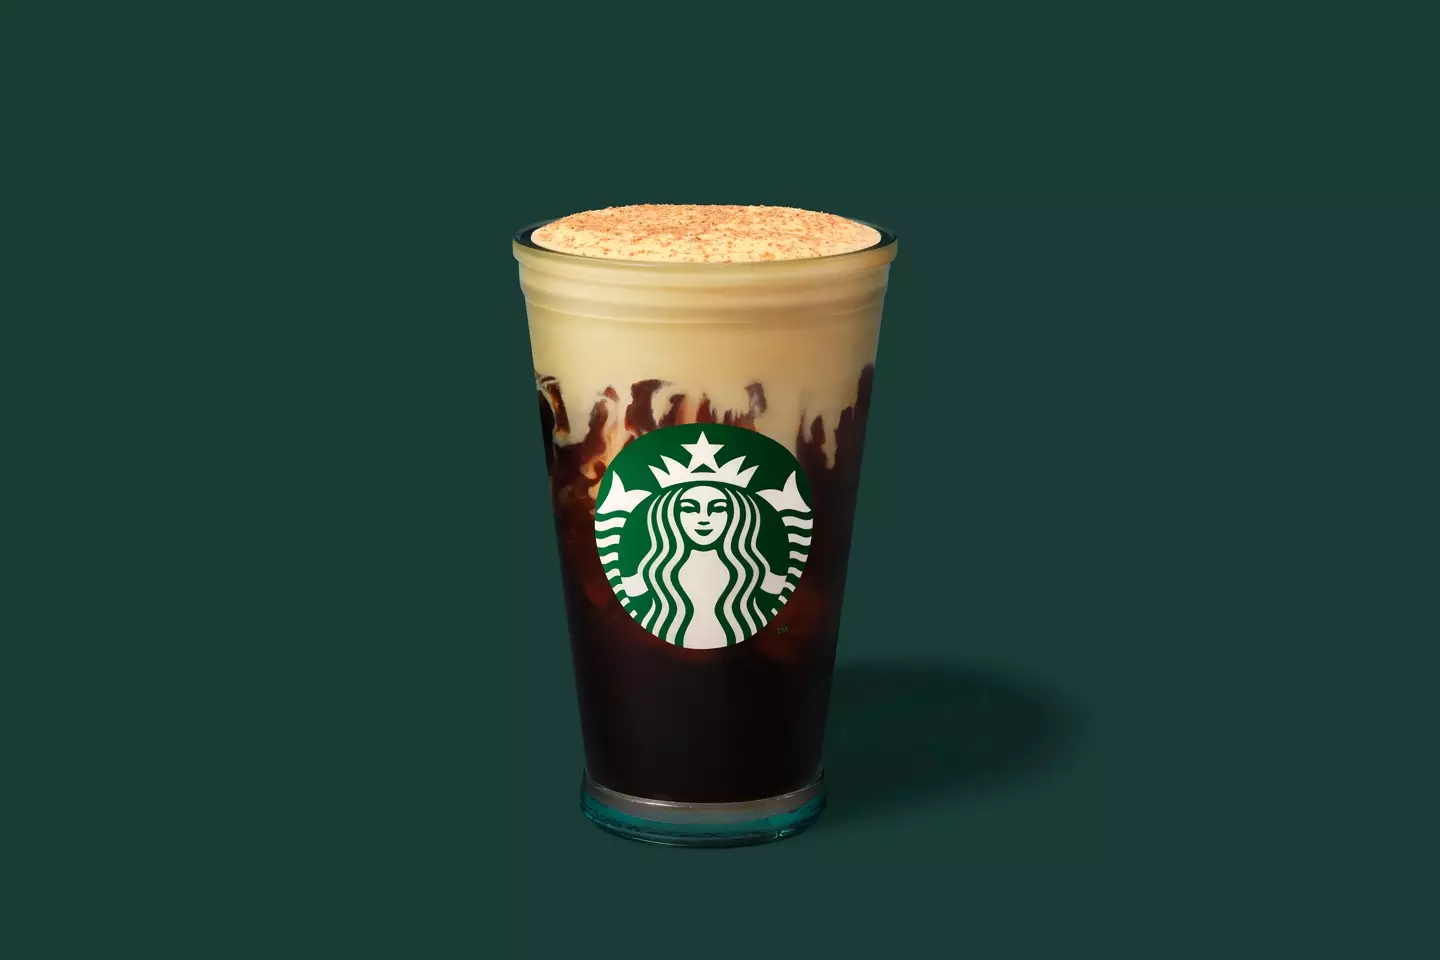 Starbucks has added another item to its menu - the pumpkin cream cold brew.